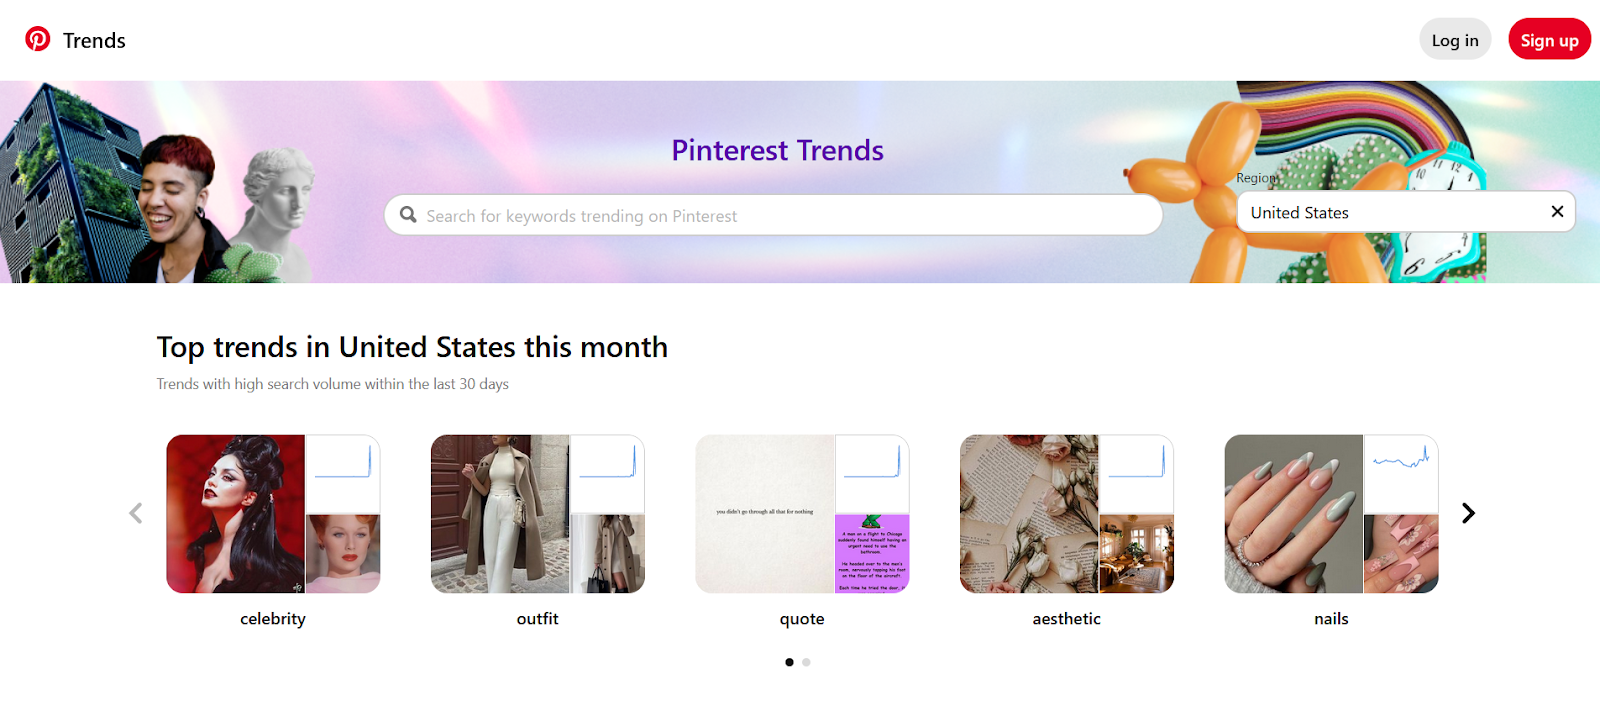 Pinterest Trends is a free tool for analyzing trending topics on Pinterest based on user searches and pin engagements.